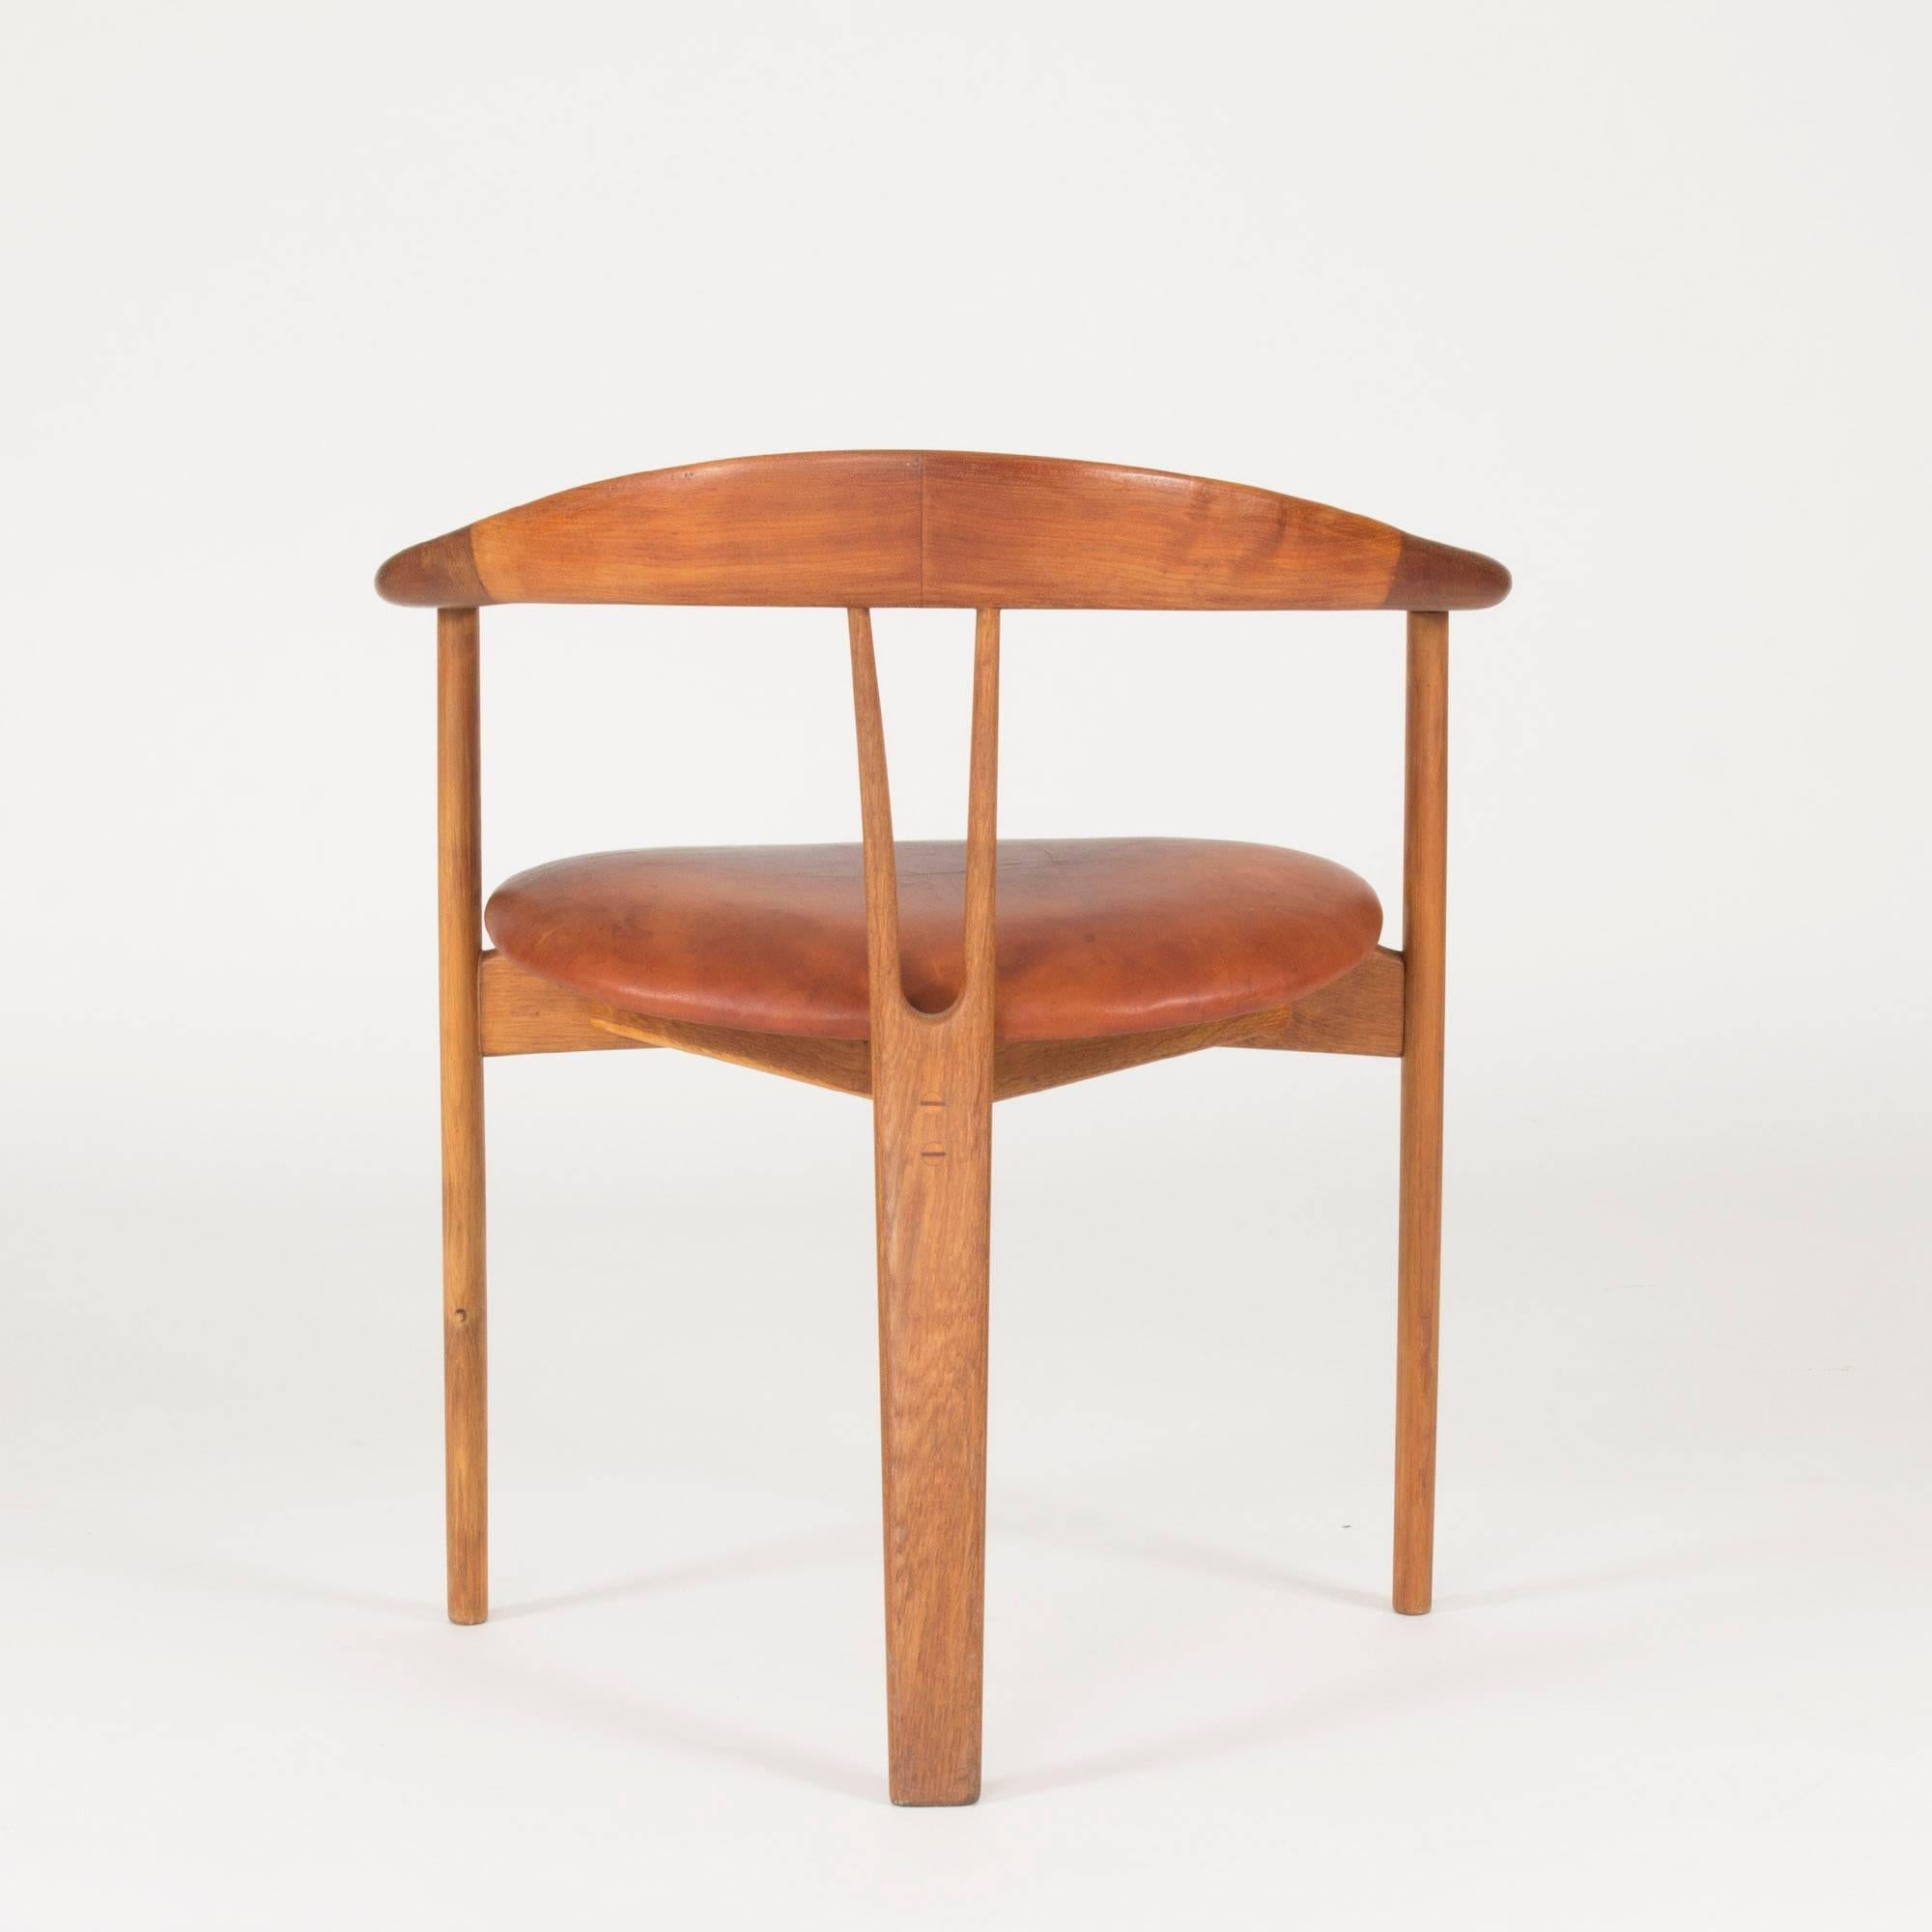 Beautifully sculpted teak armchair by Arne Hovmand Olsen. Original leather seat with great patina, lovely details on the armrests and on the backrest that hide joinery.